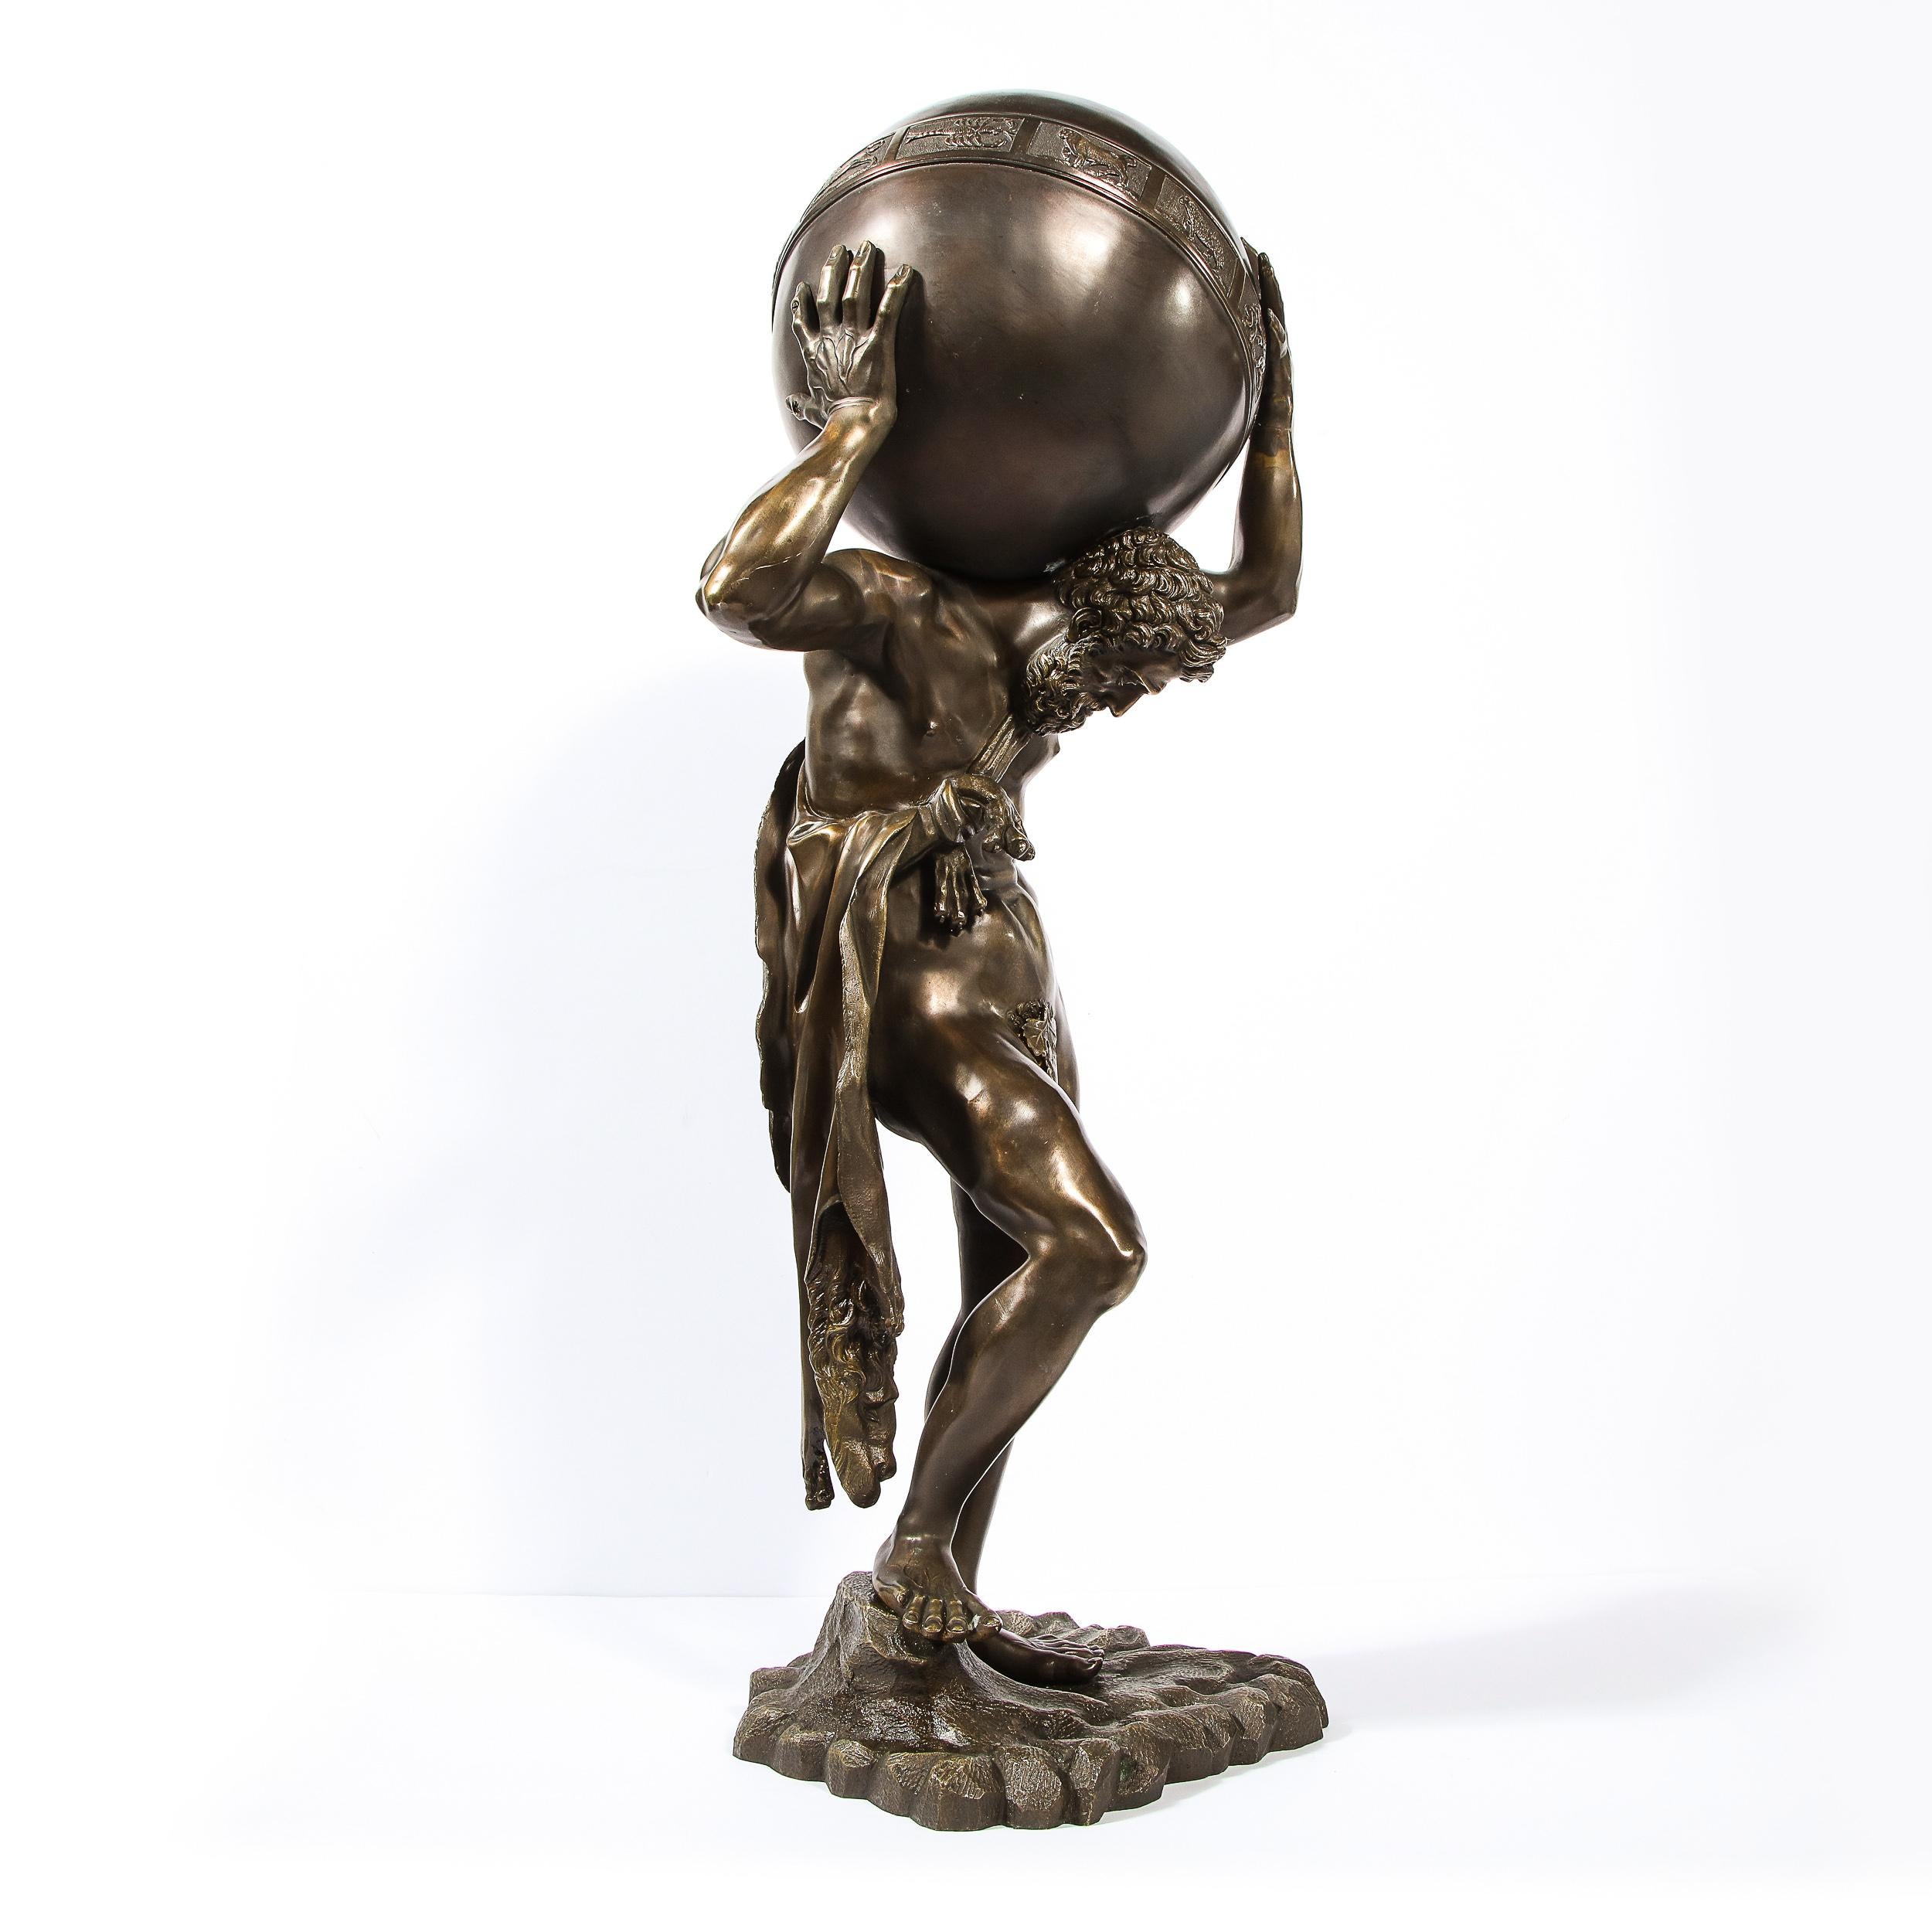 This stunning and beautifully crafted bronze sculpture was realized in the United States, circa 1960. It presents Atlas- the Titan in Greek mythology condemned to hold up the celestial heavens or sky for eternity after the Titanomachy (a ten year